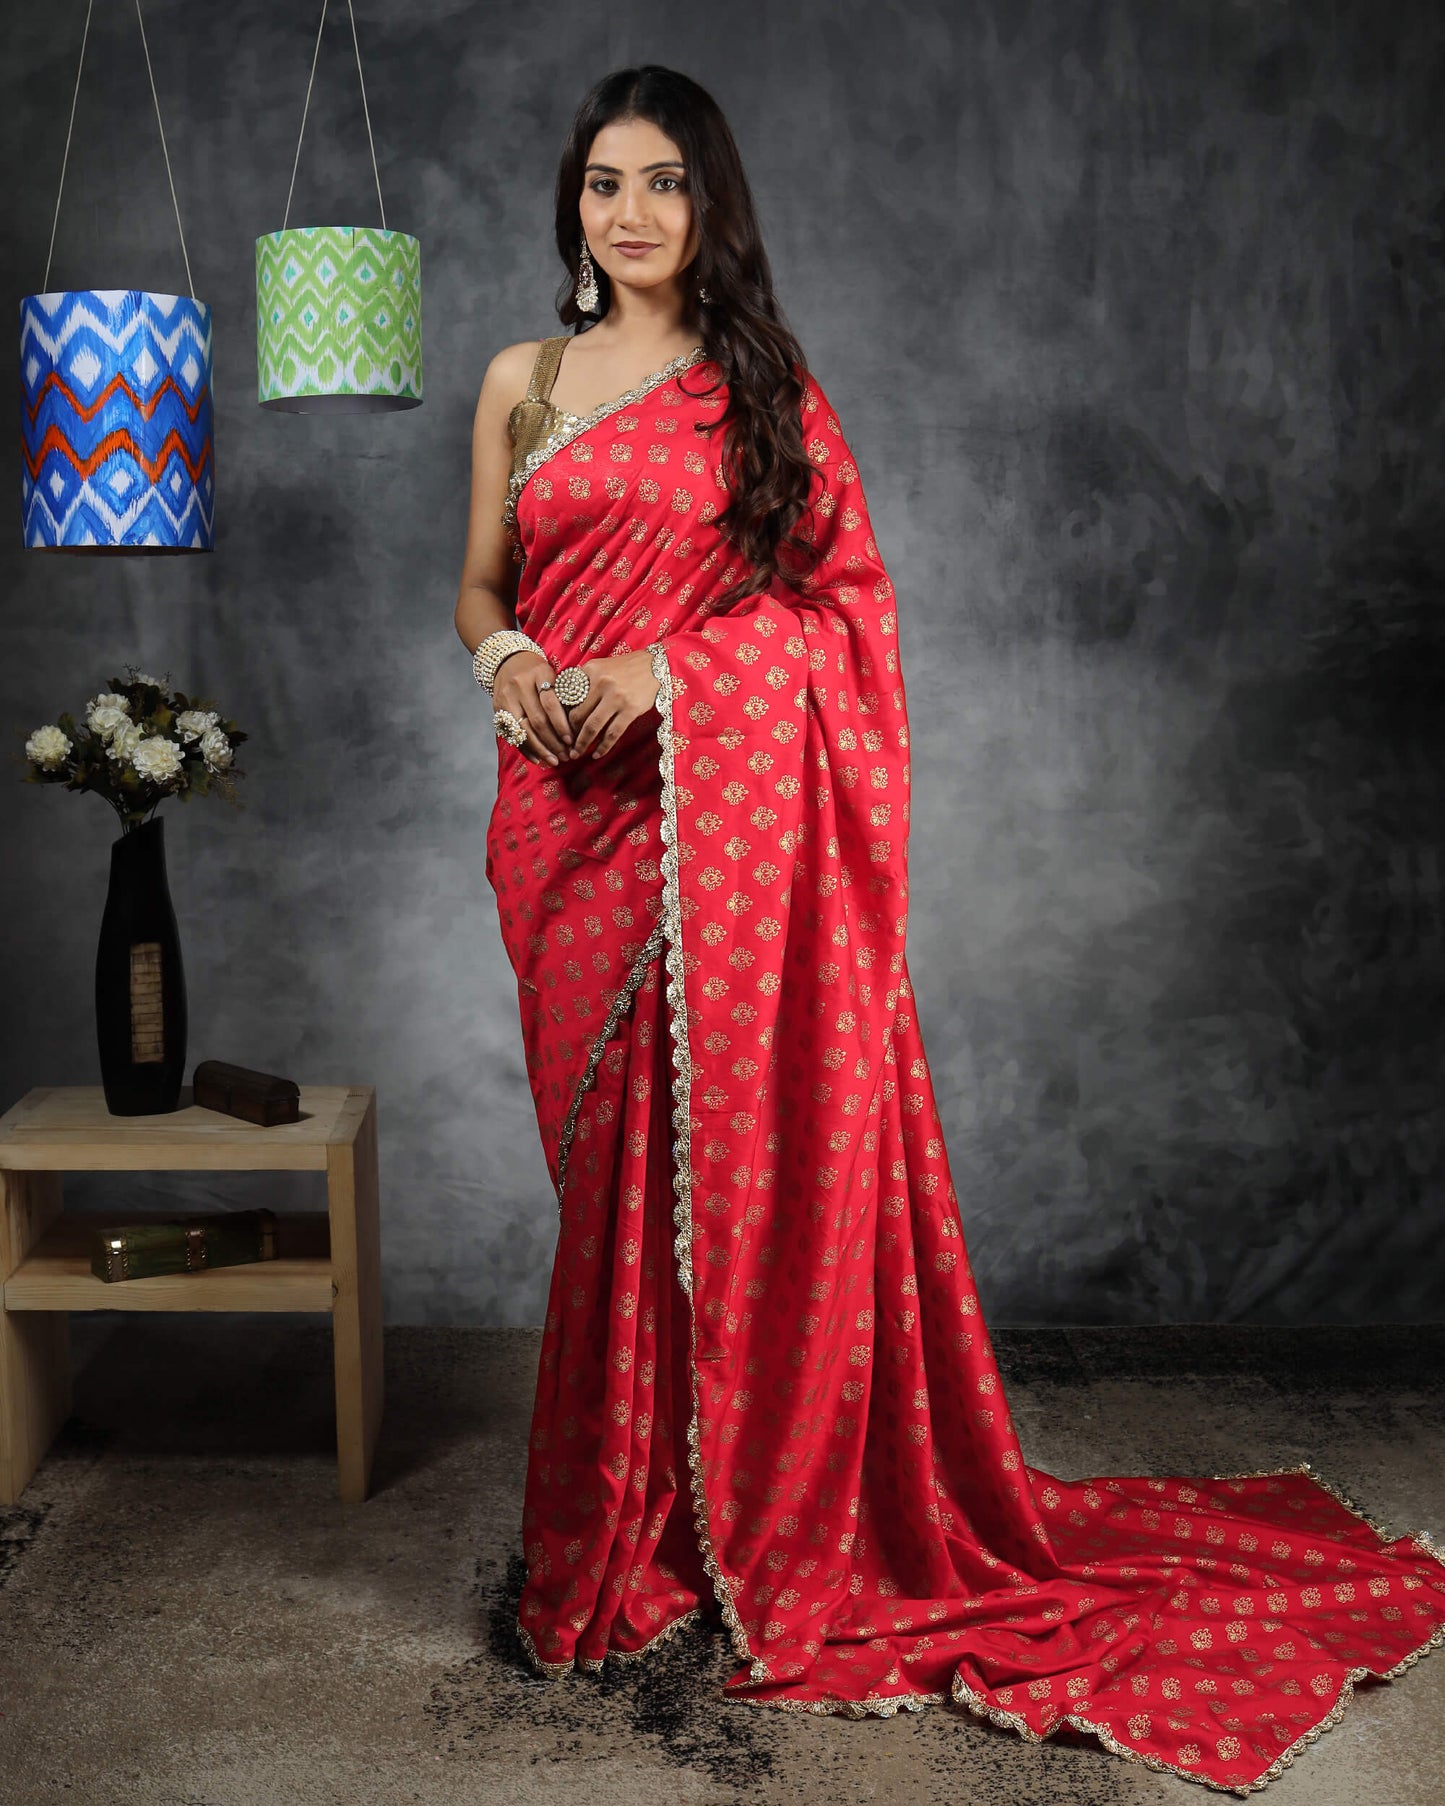 Red Booti Pattern Golden Foil Screen Print Chanderi Saree With Zari Sequins Lace Border